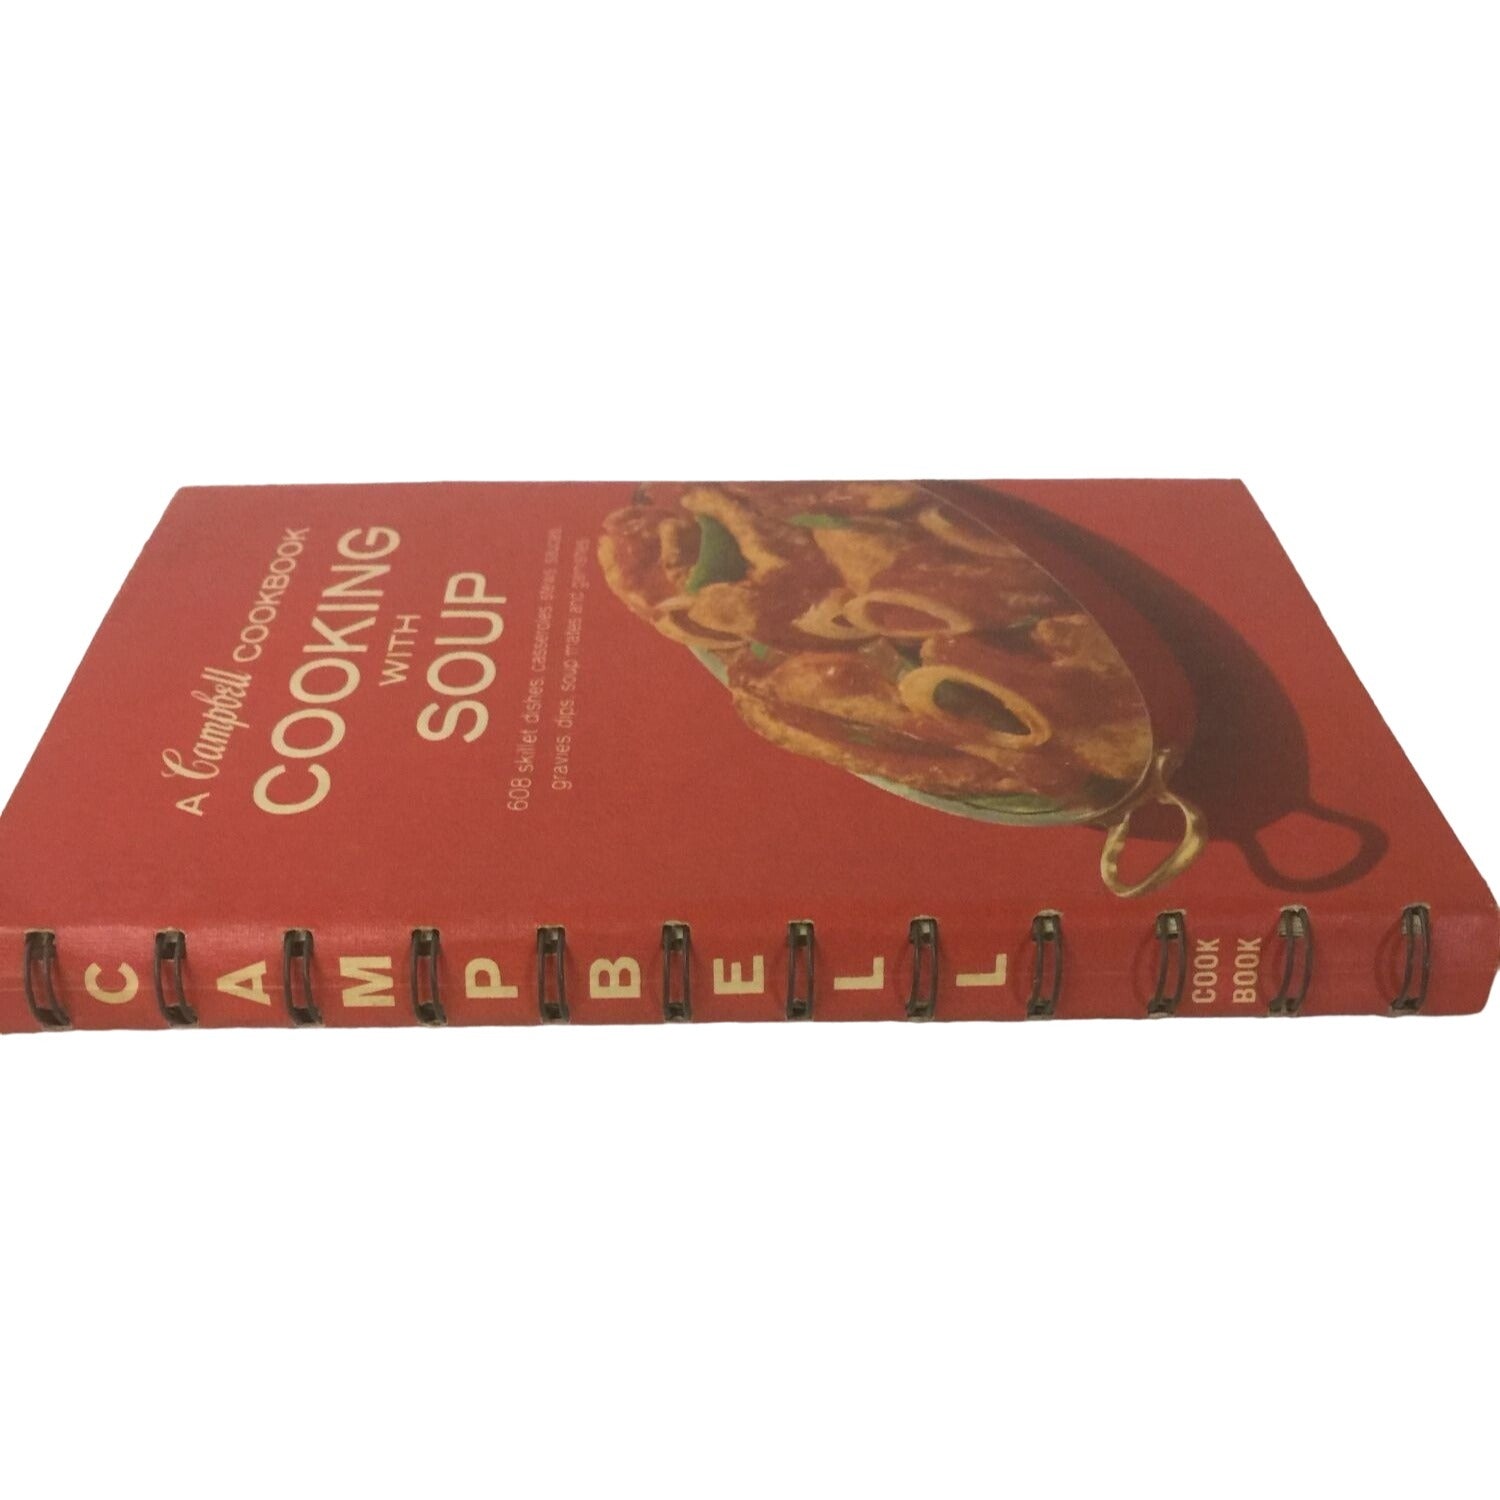 A Campbell Cookbook - Cooking with Soup (608 Recipes)